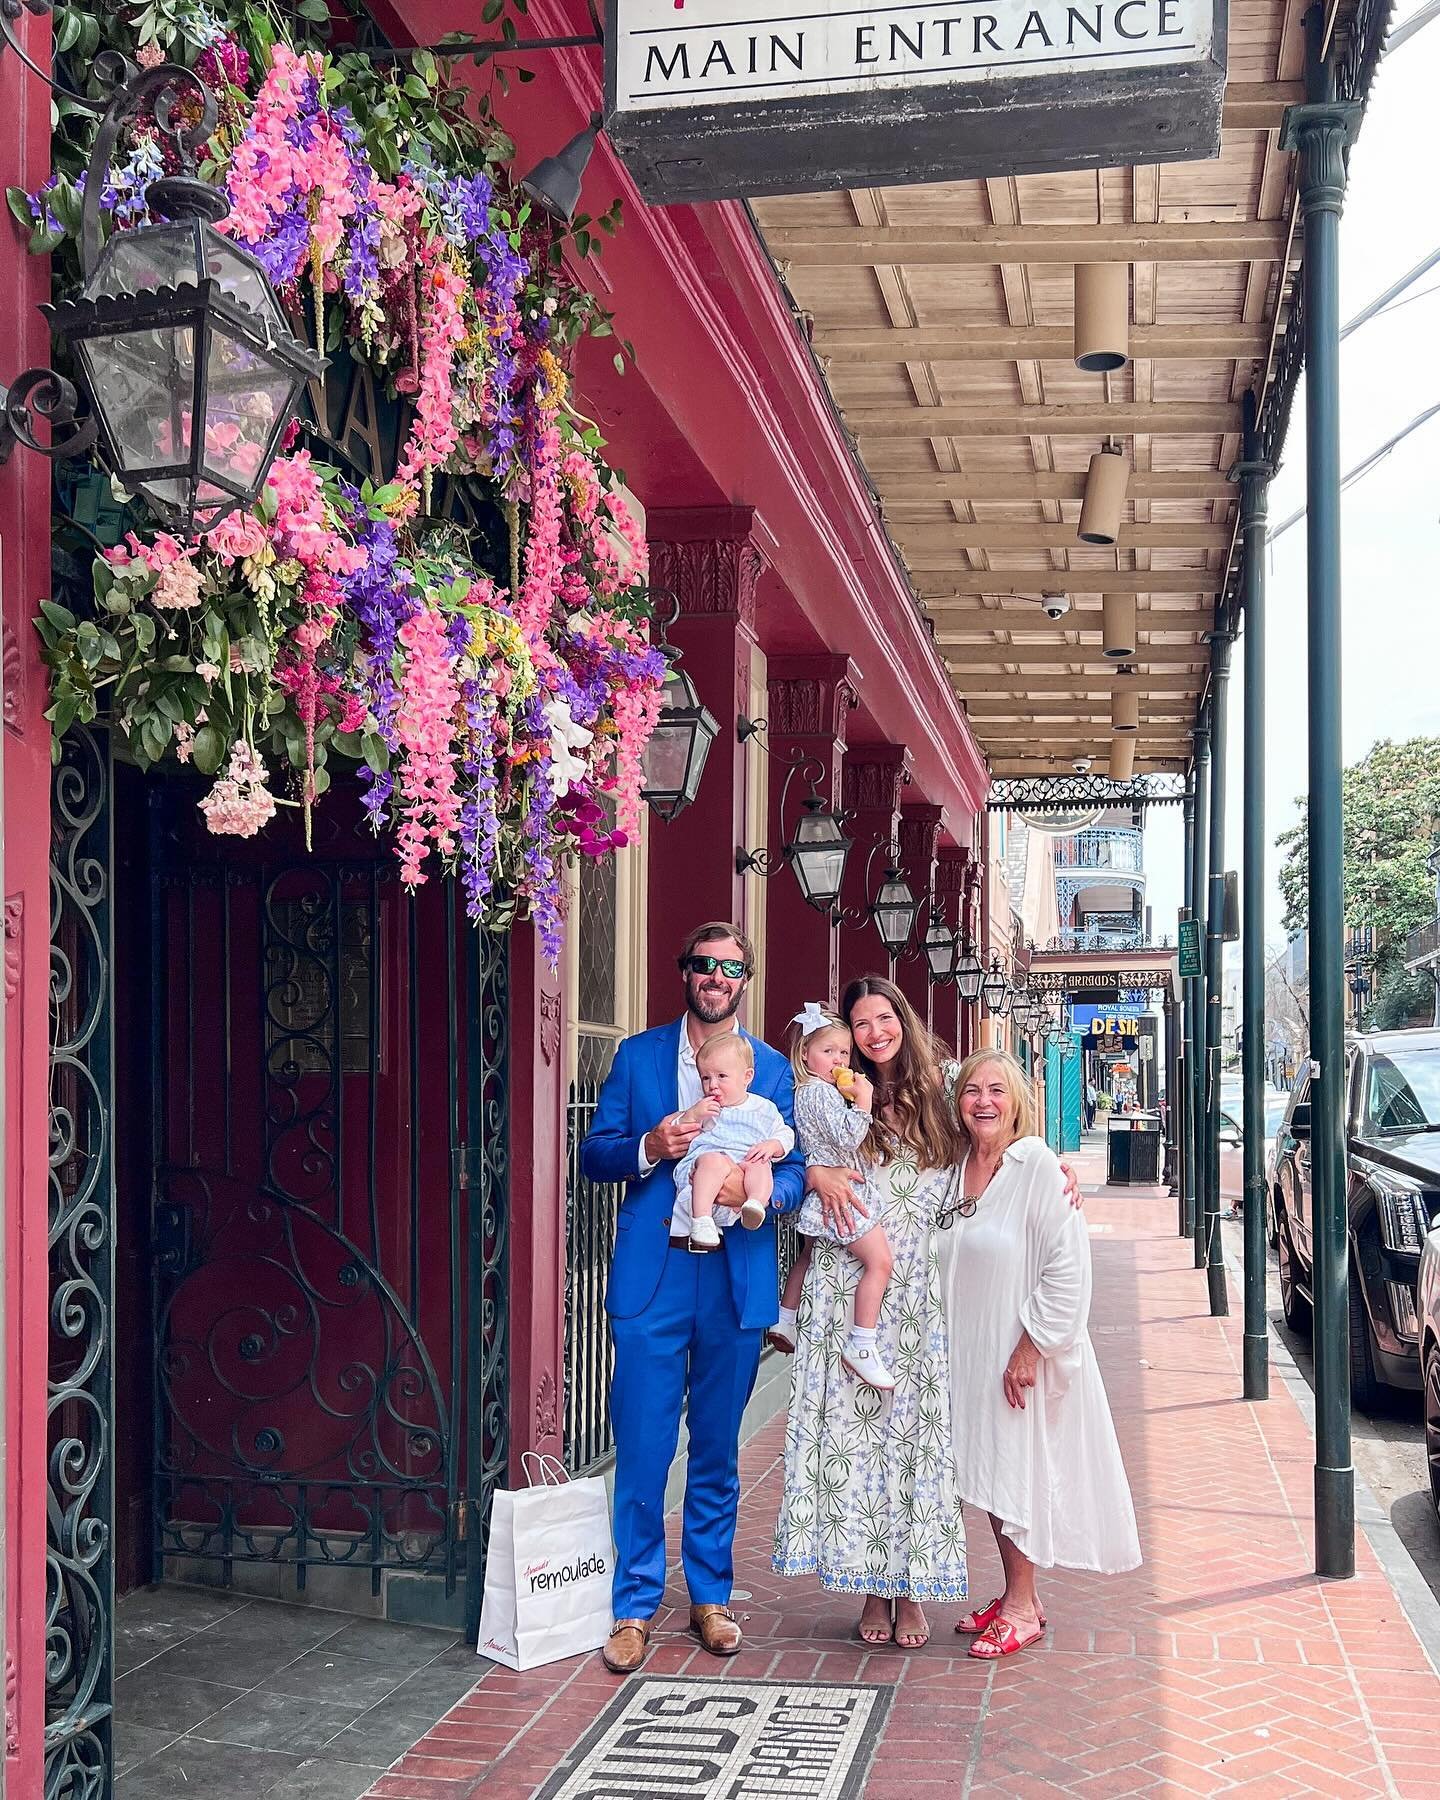 Mother&rsquo;s Day 〰️ got dressed up and had a phenomenal Mother&rsquo;s Day brunch @arnaudsnola. ✨ Exceptional atmosphere, outstanding food and drinks, stellar service. If you are looking for the ultimate place to celebrate&mdash;this is it. It was 